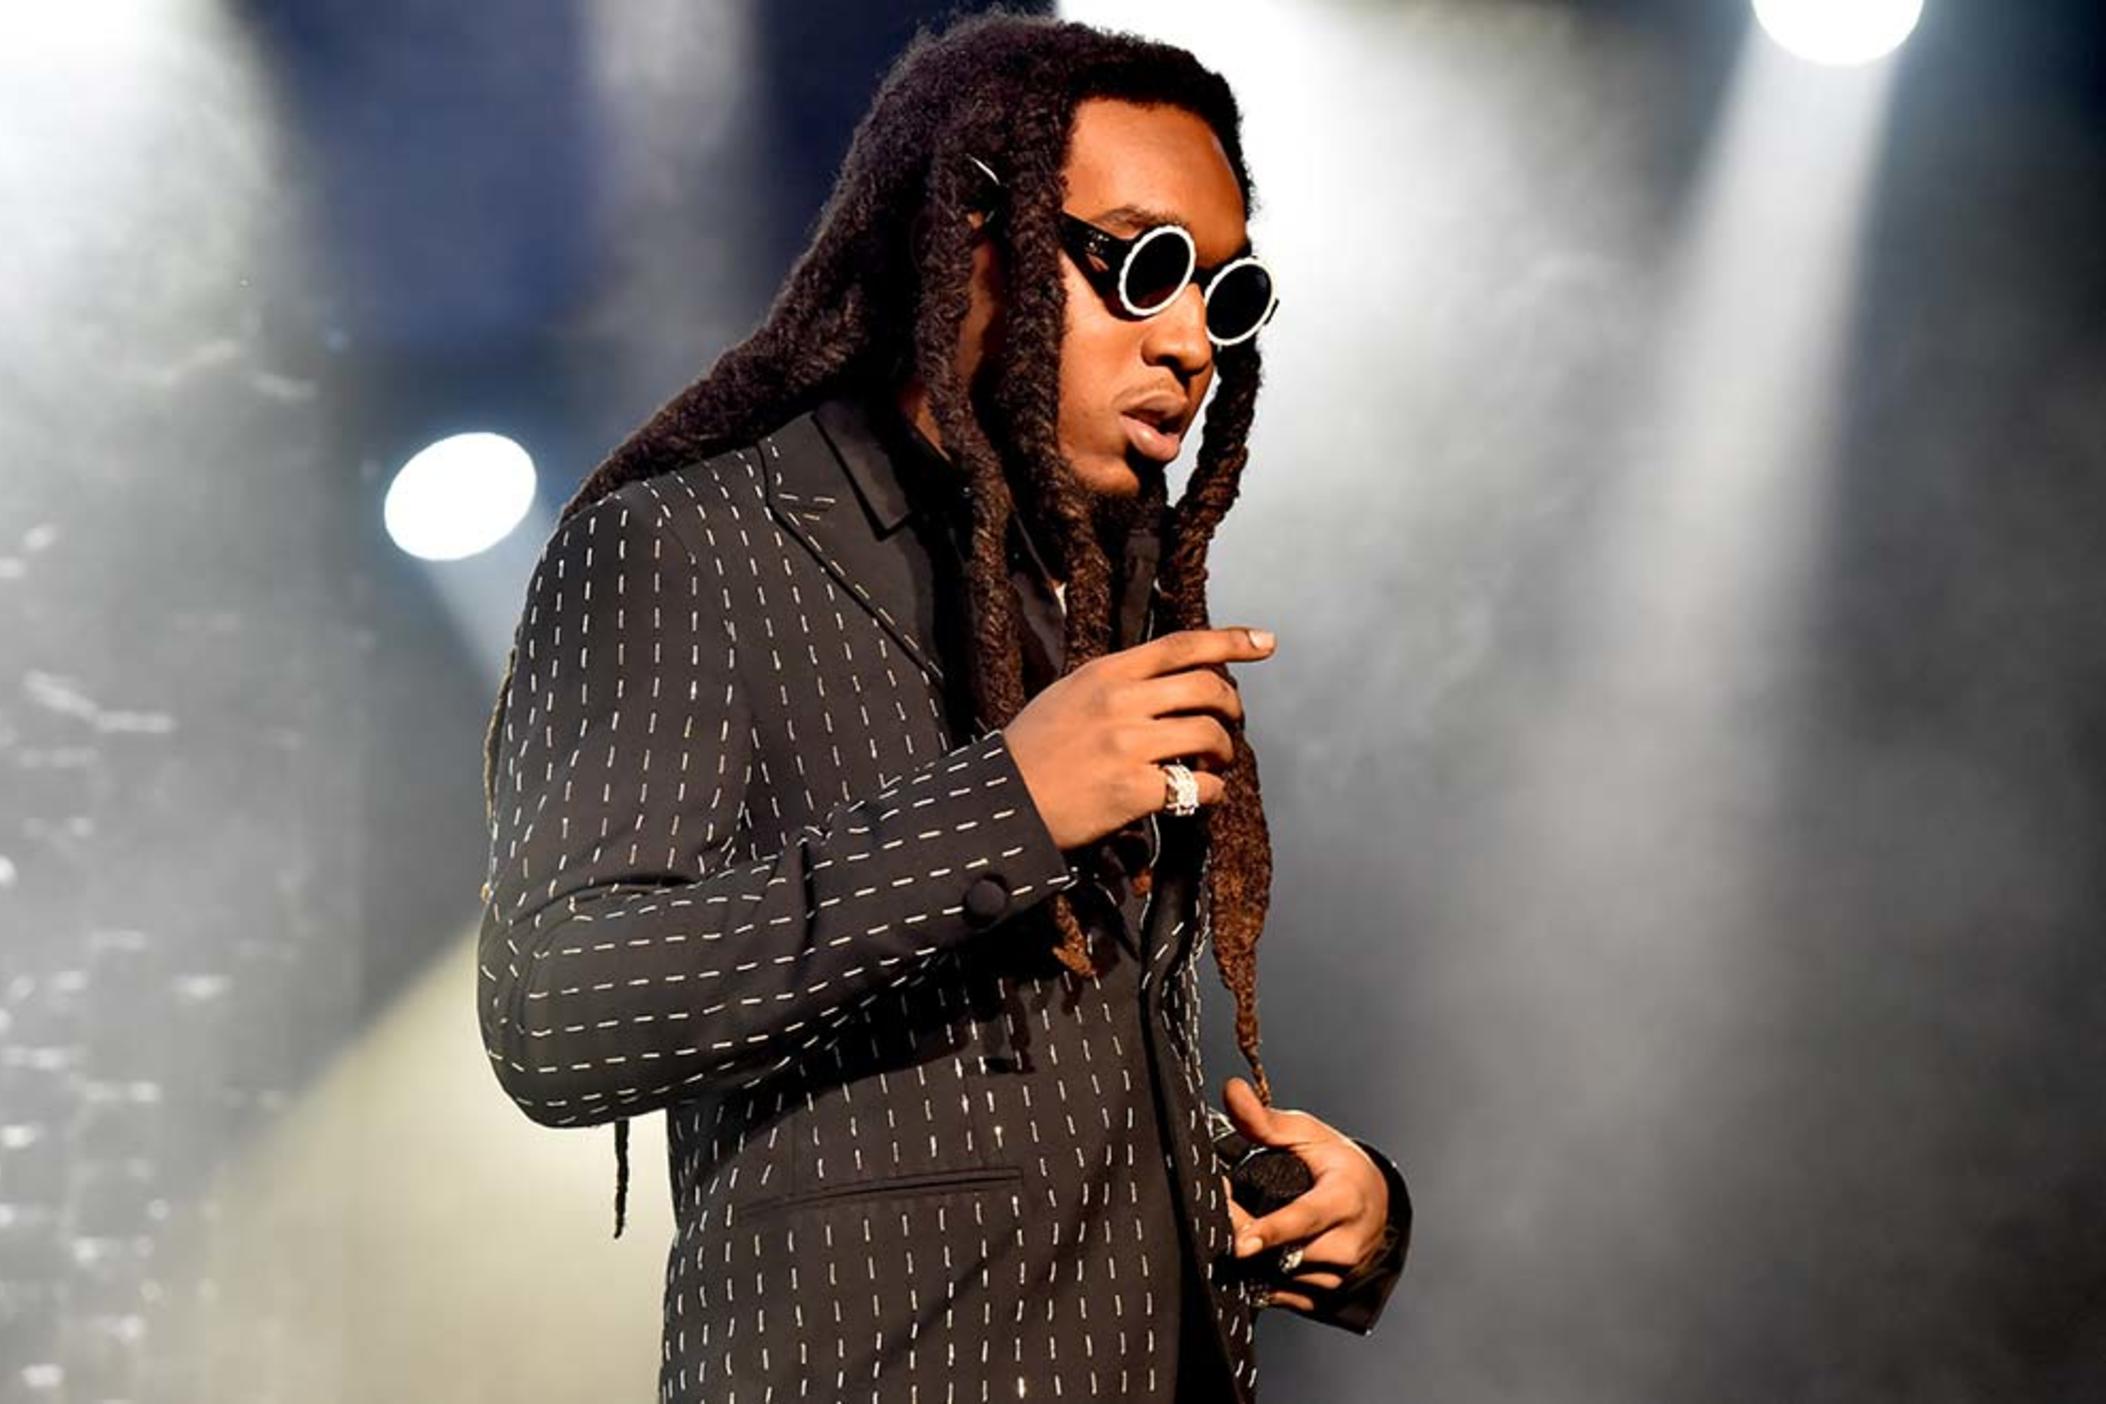 Born Kirsnick Khari Ball, Takeoff was a member of the hip-hop group Migos. He was killed Nov. 1 in a shooting outside a Houston bowling alley.